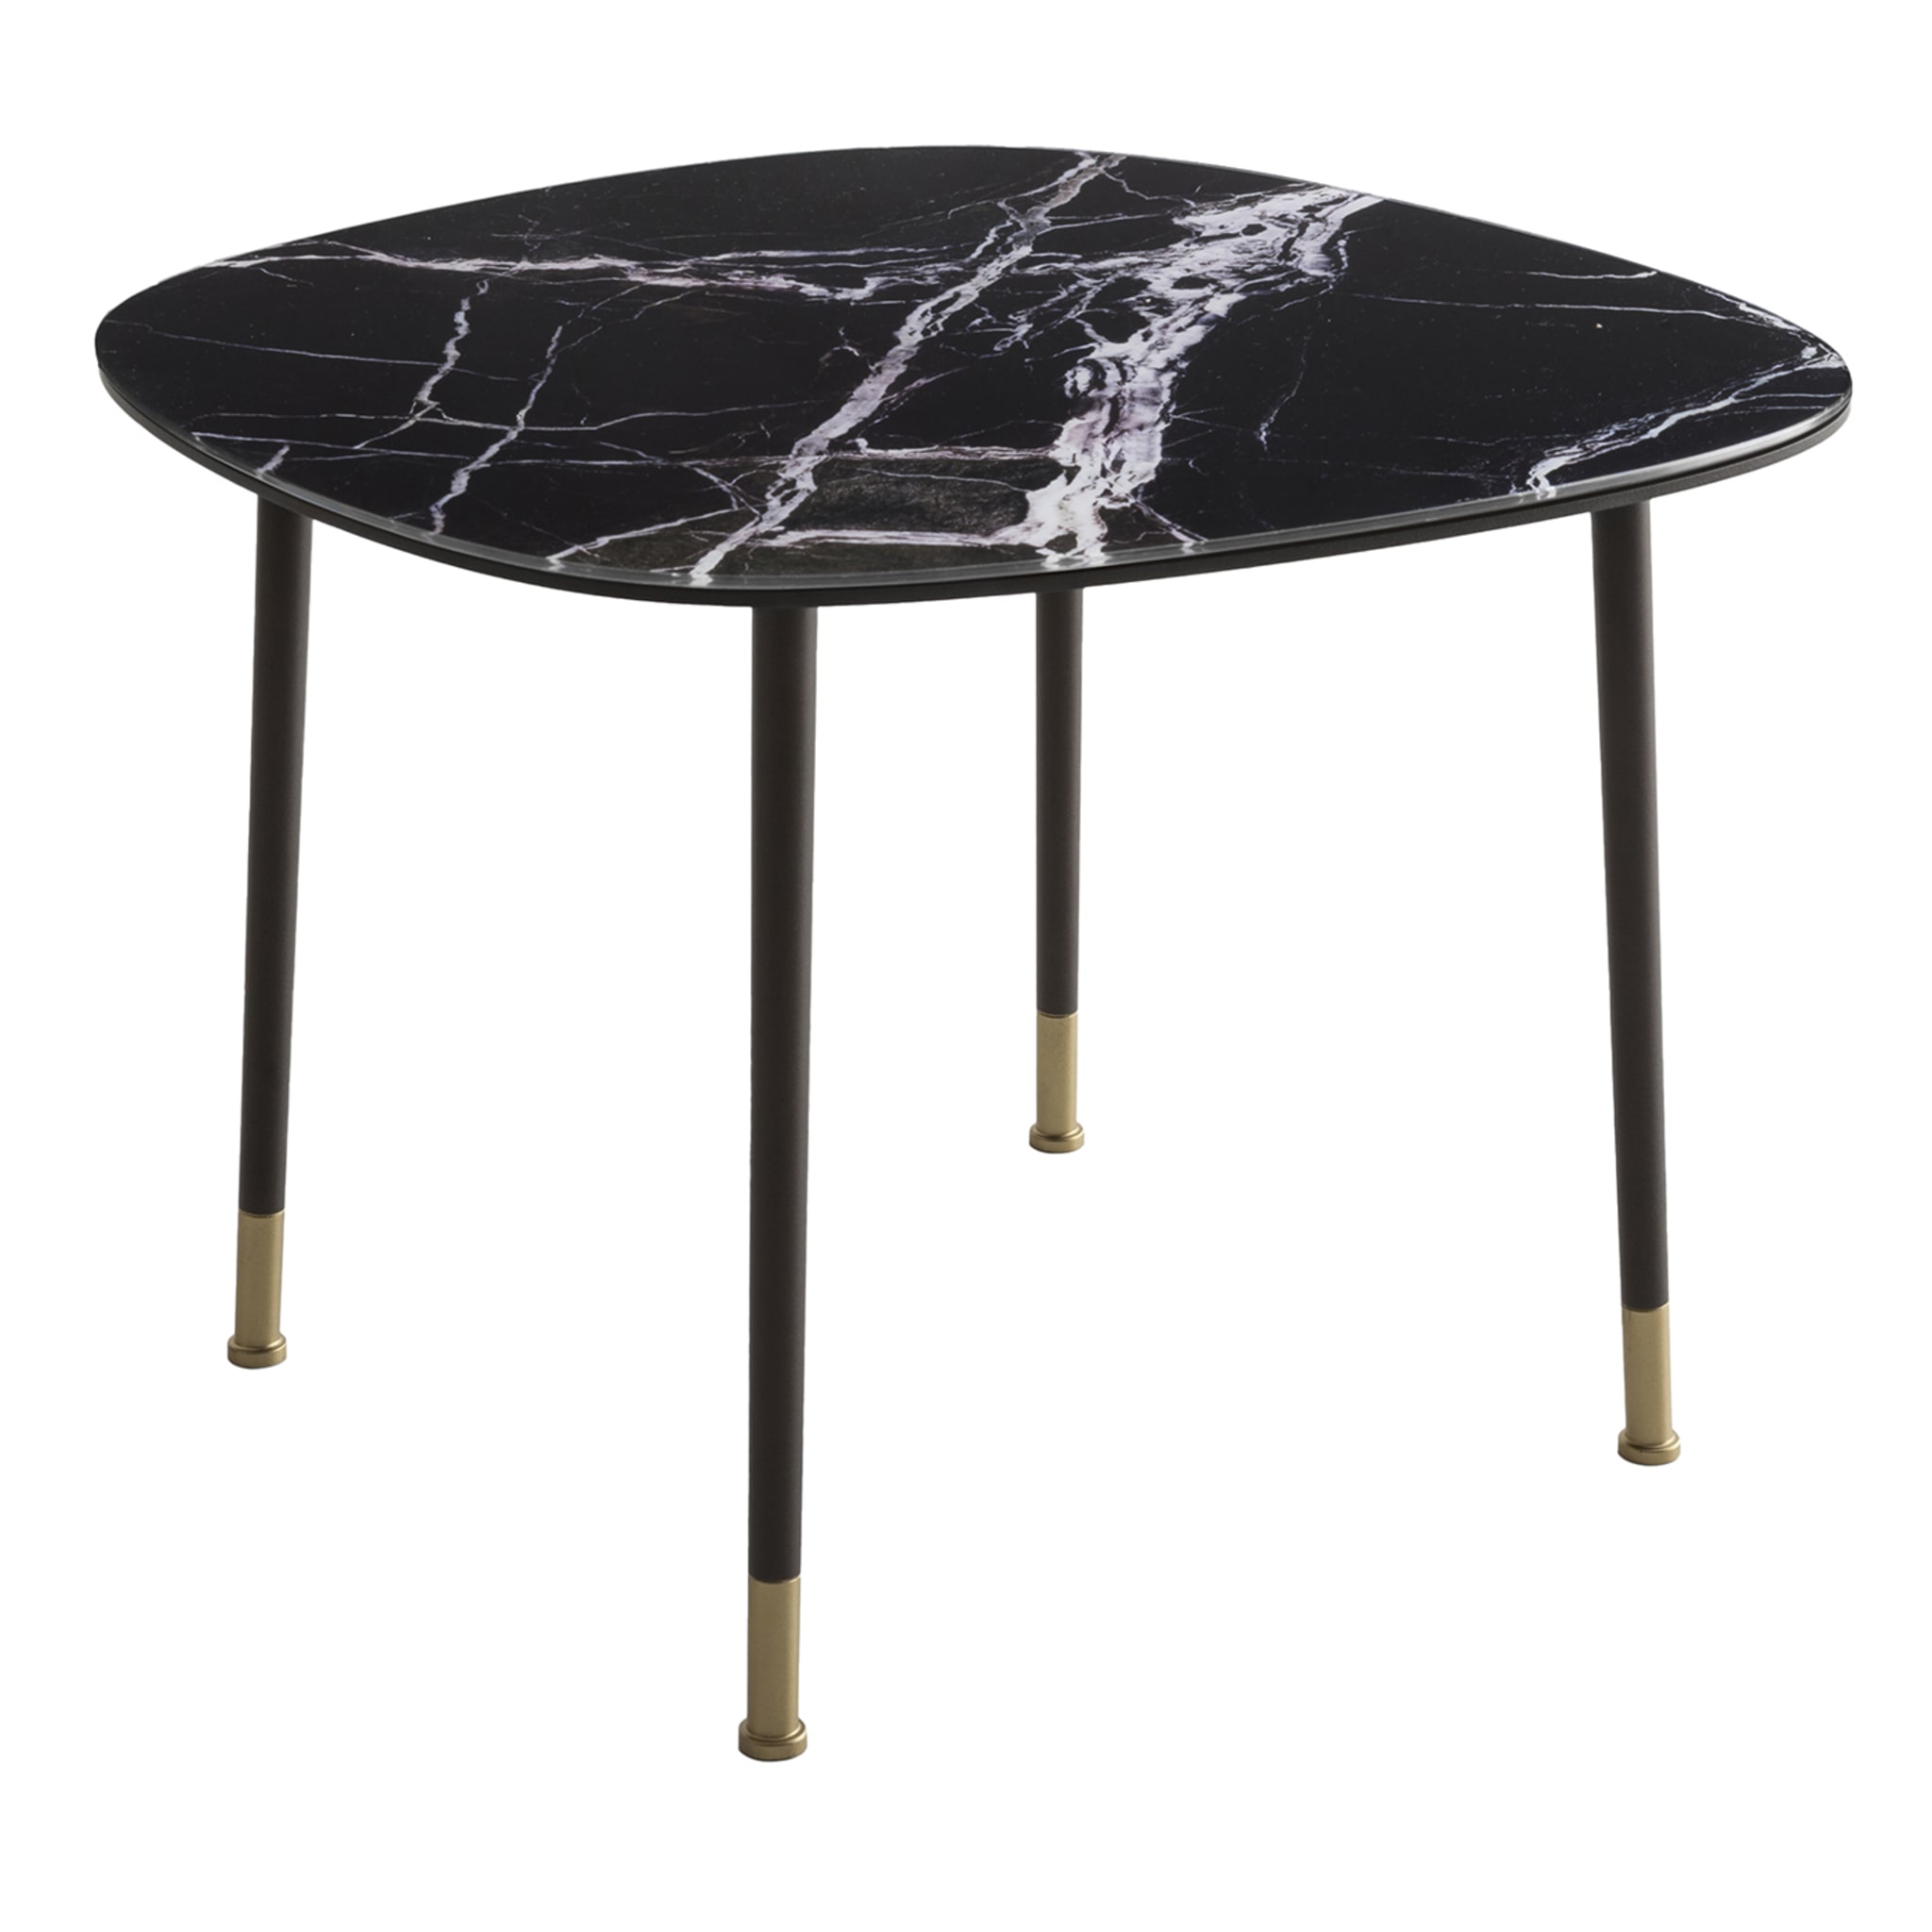 Pebble Medium Breccia Imperiale Marble-Effect Coffee Table - Main view